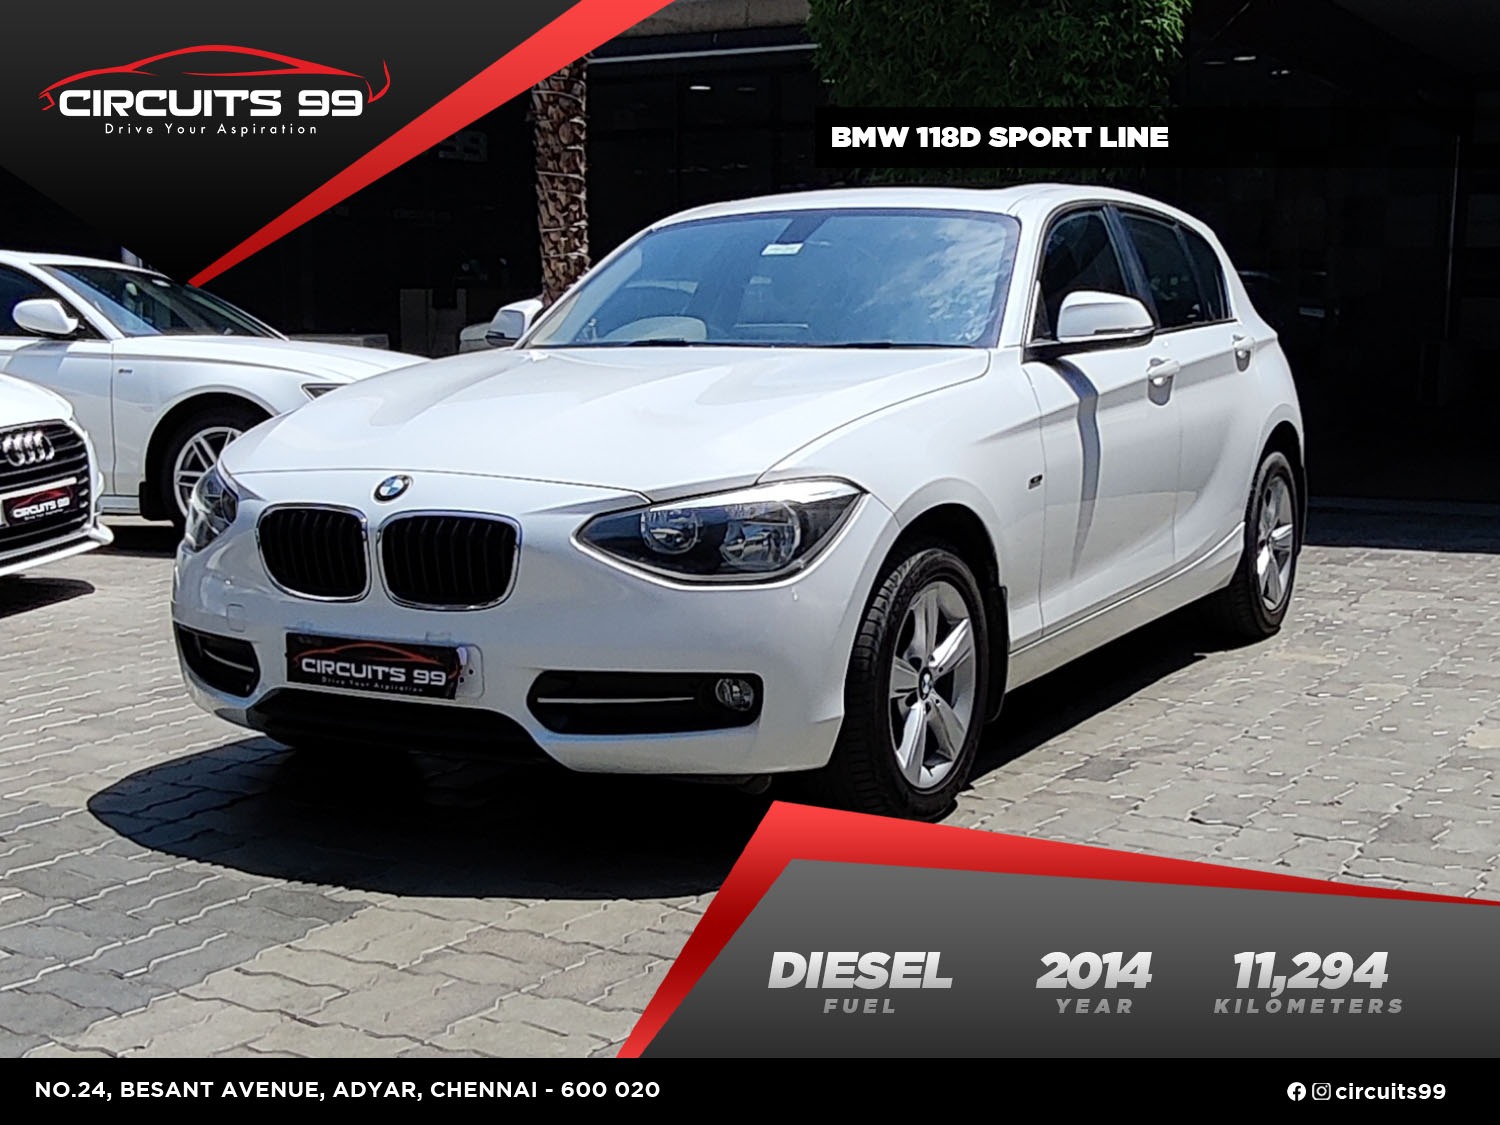 BMW 118D sports Pre-owned car